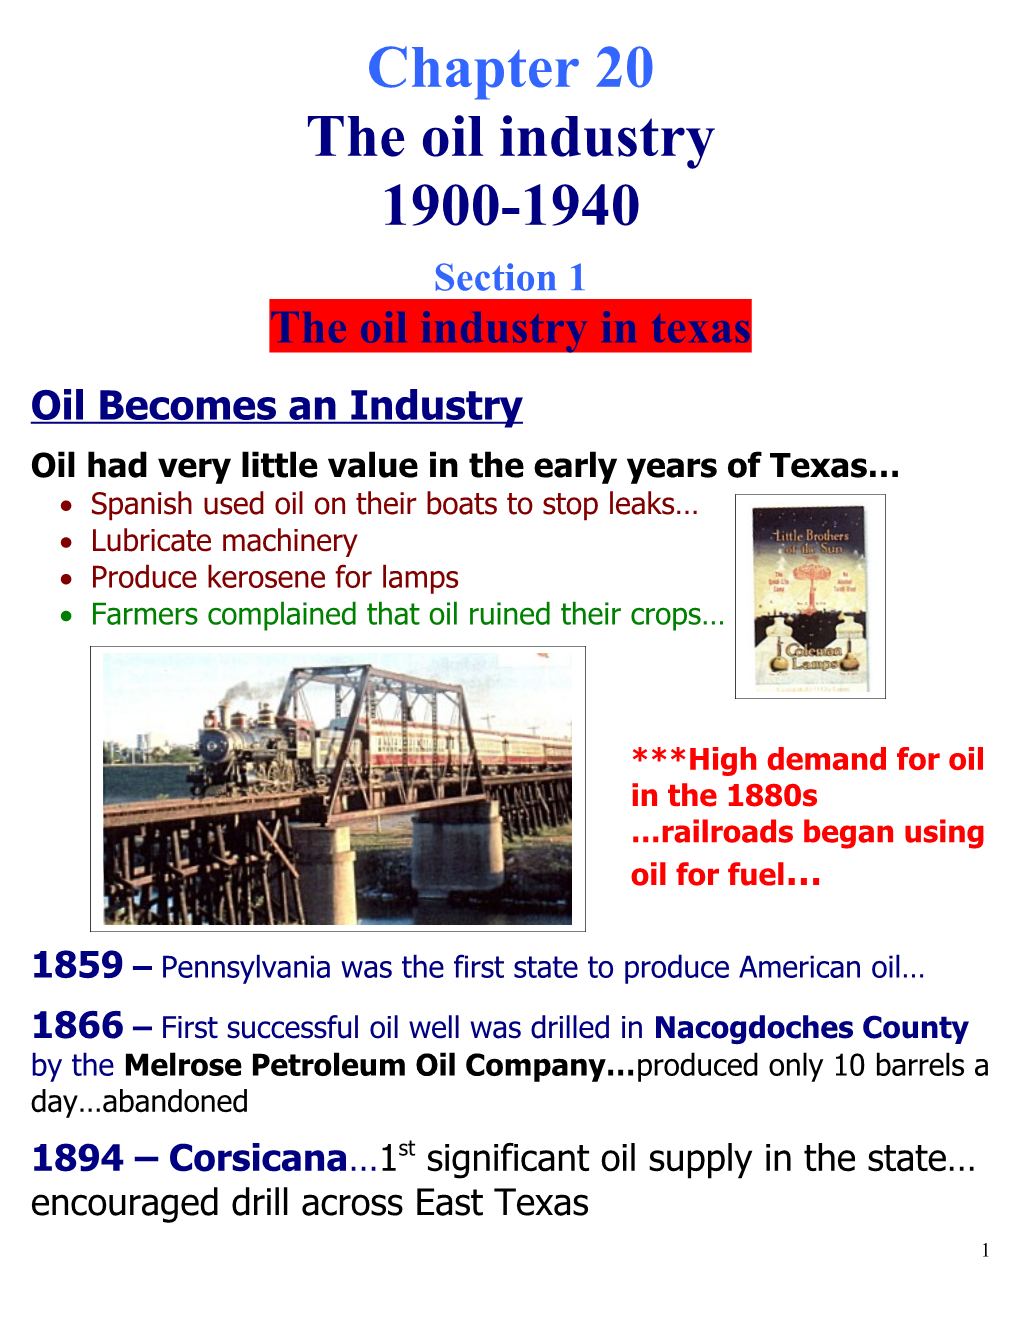 The Oil Industry in Texas